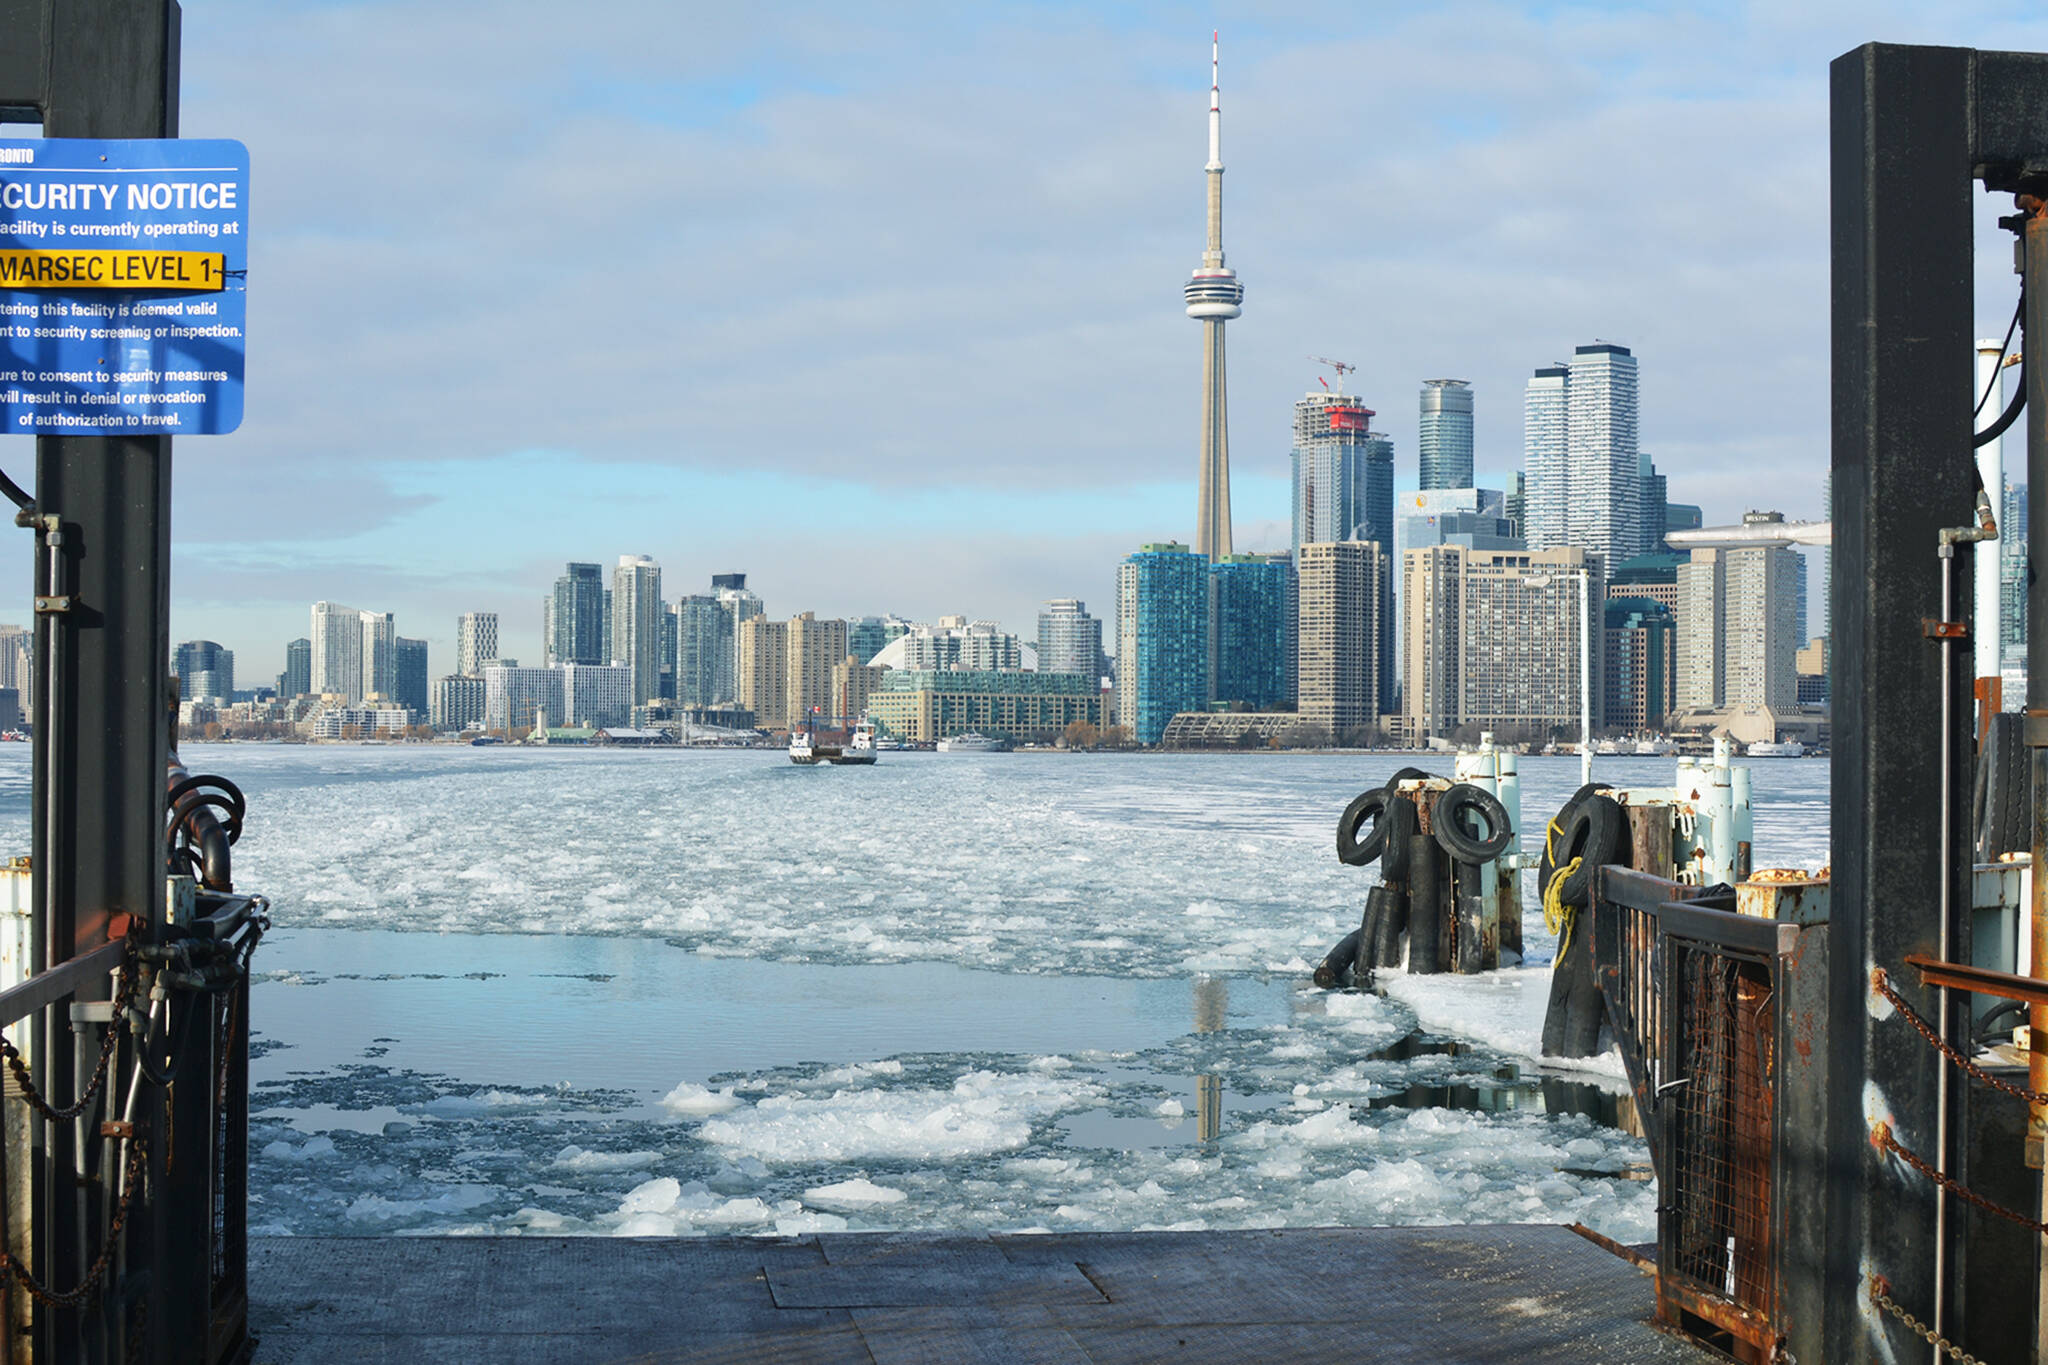 Springlike weather over for Toronto as extreme cold weather alert